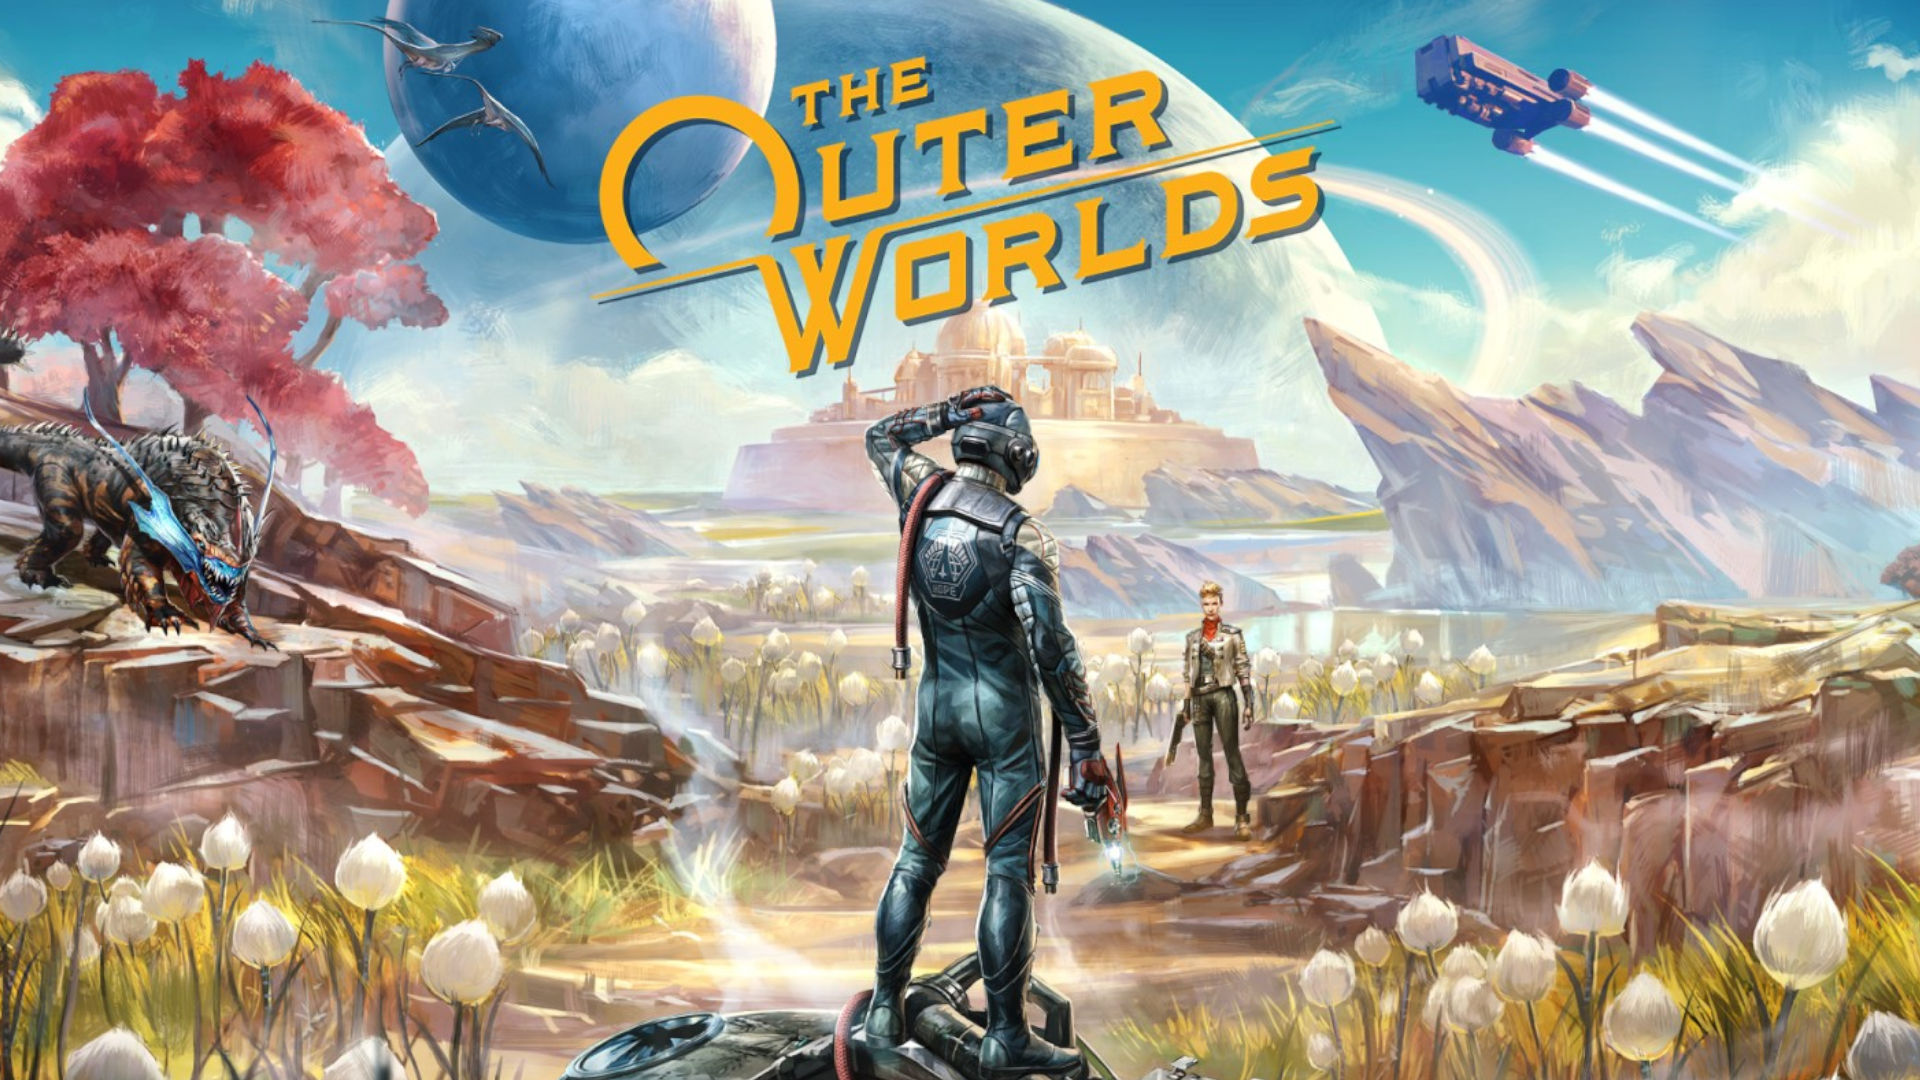 Best space games: The Outer Worlds. Image shows a character looking out at an alien landscape with the game's logo at the centre middle of the frame.